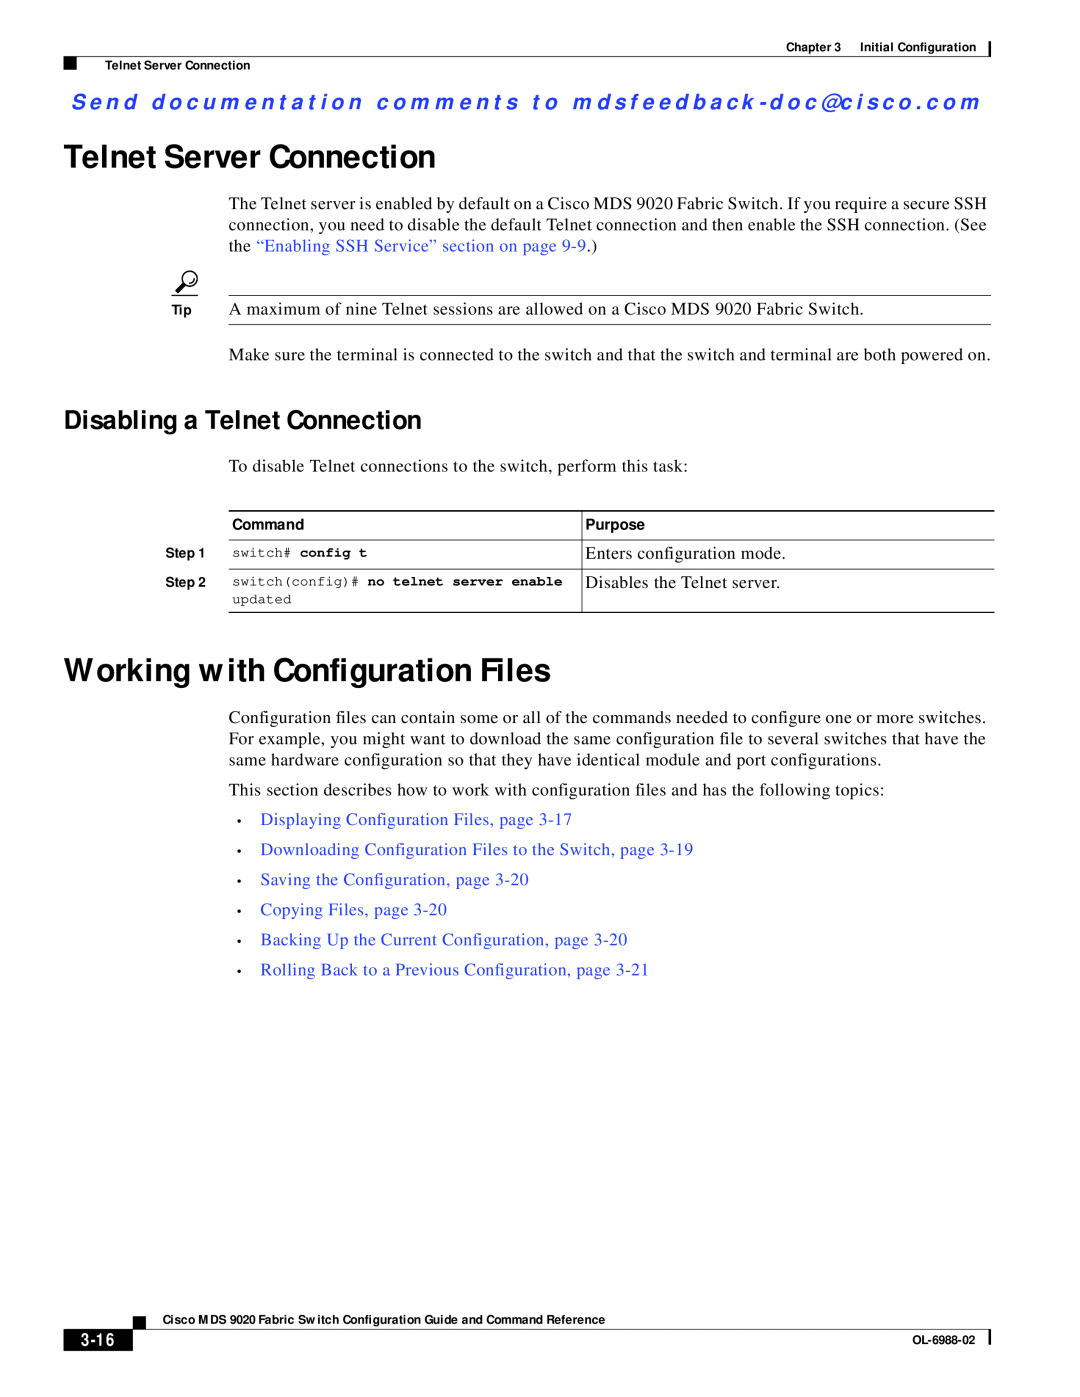 Cisco Systems MDS 9020 Telnet Server Connection, Working with Configuration Files, Disabling a Telnet Connection, 3-16 